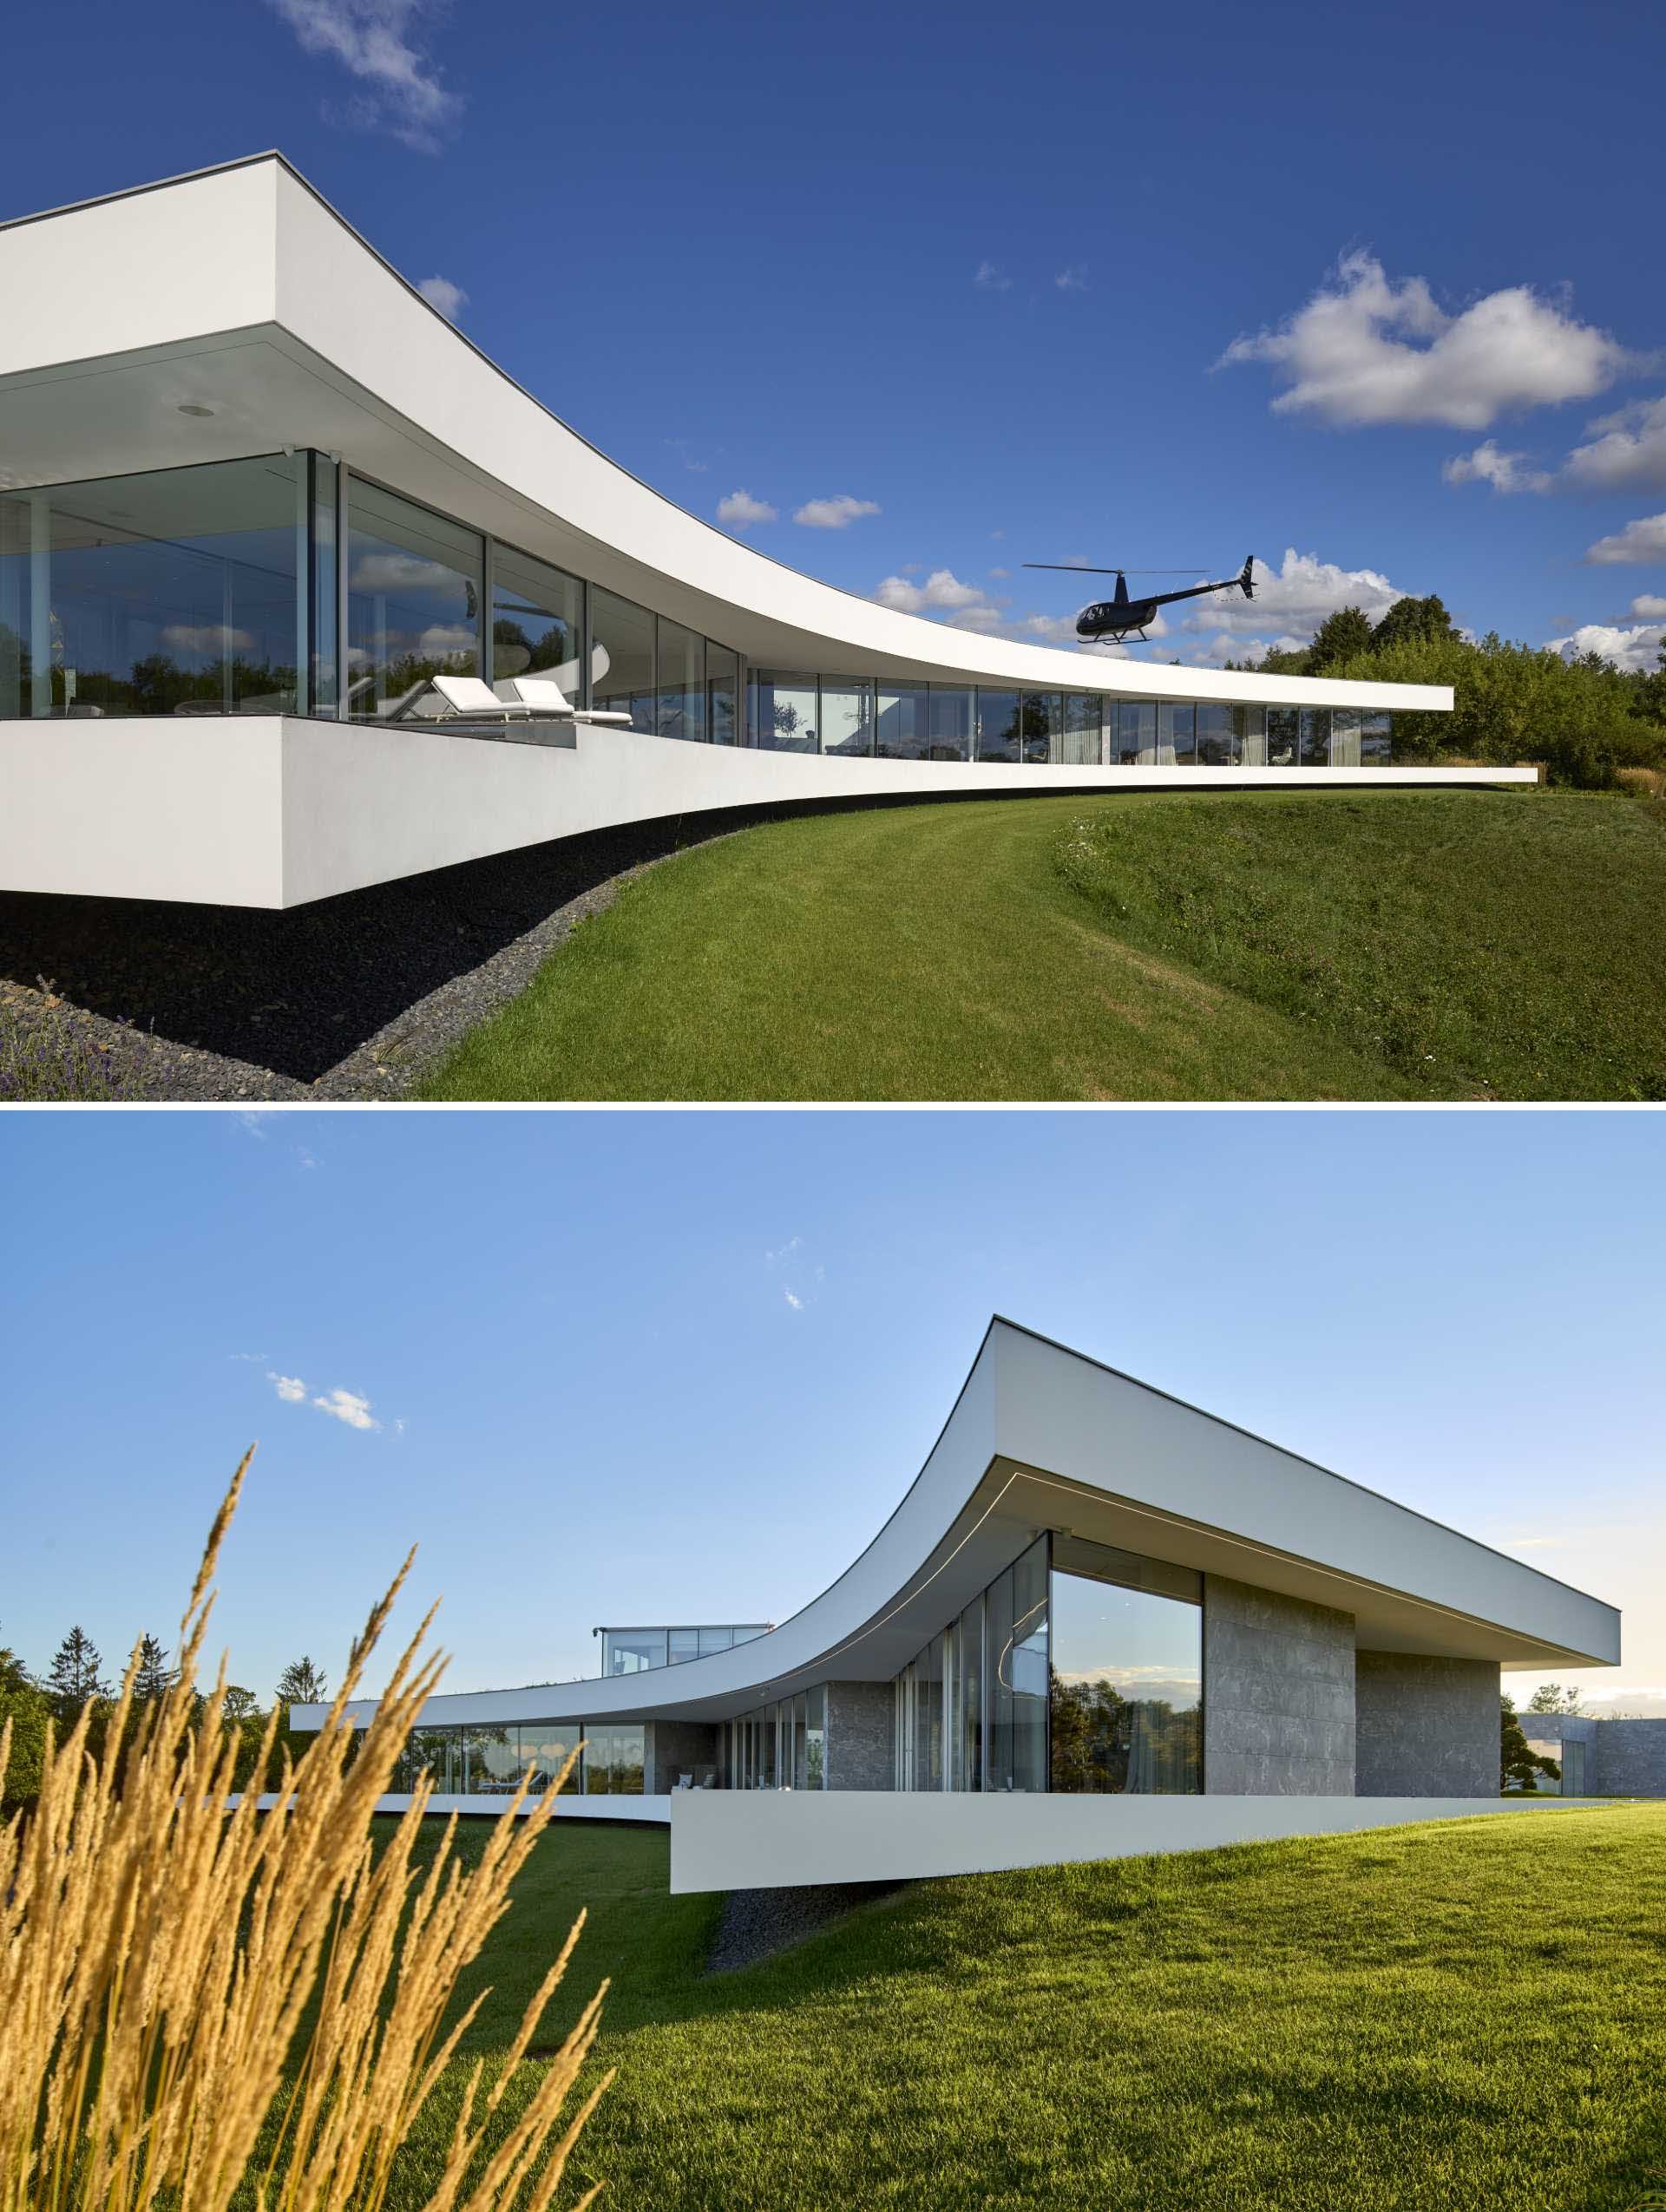 The arc of the house, which follows the bend of the river, creates a long terrace of several hundred meters, adding to the living area of the home.